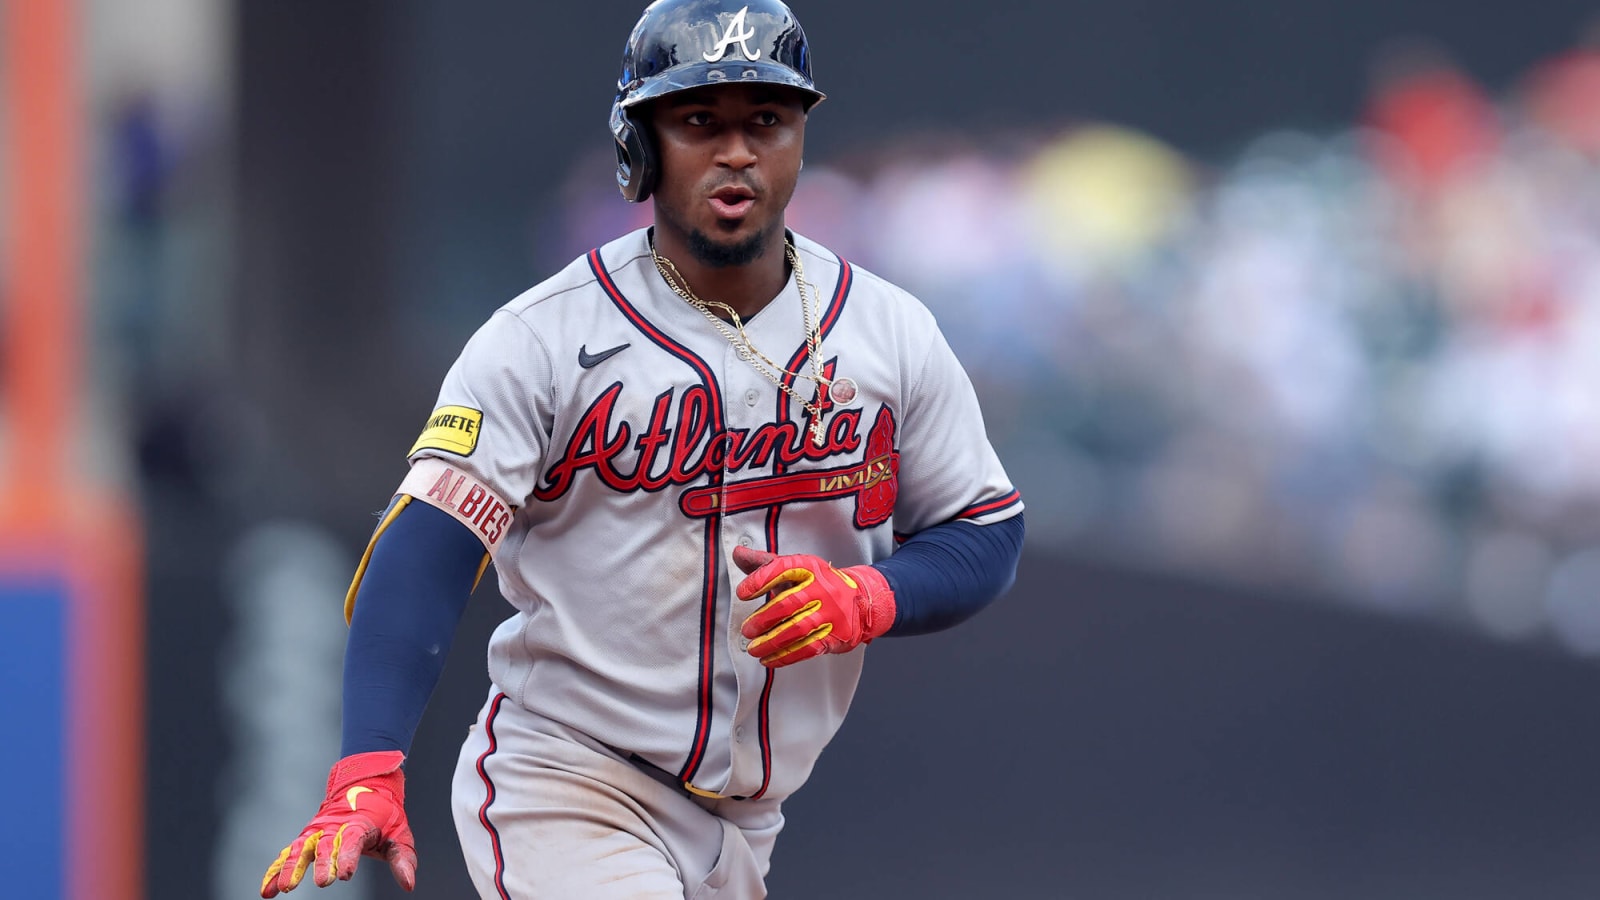 It took Vaughn Grissom 4 games to make Braves history